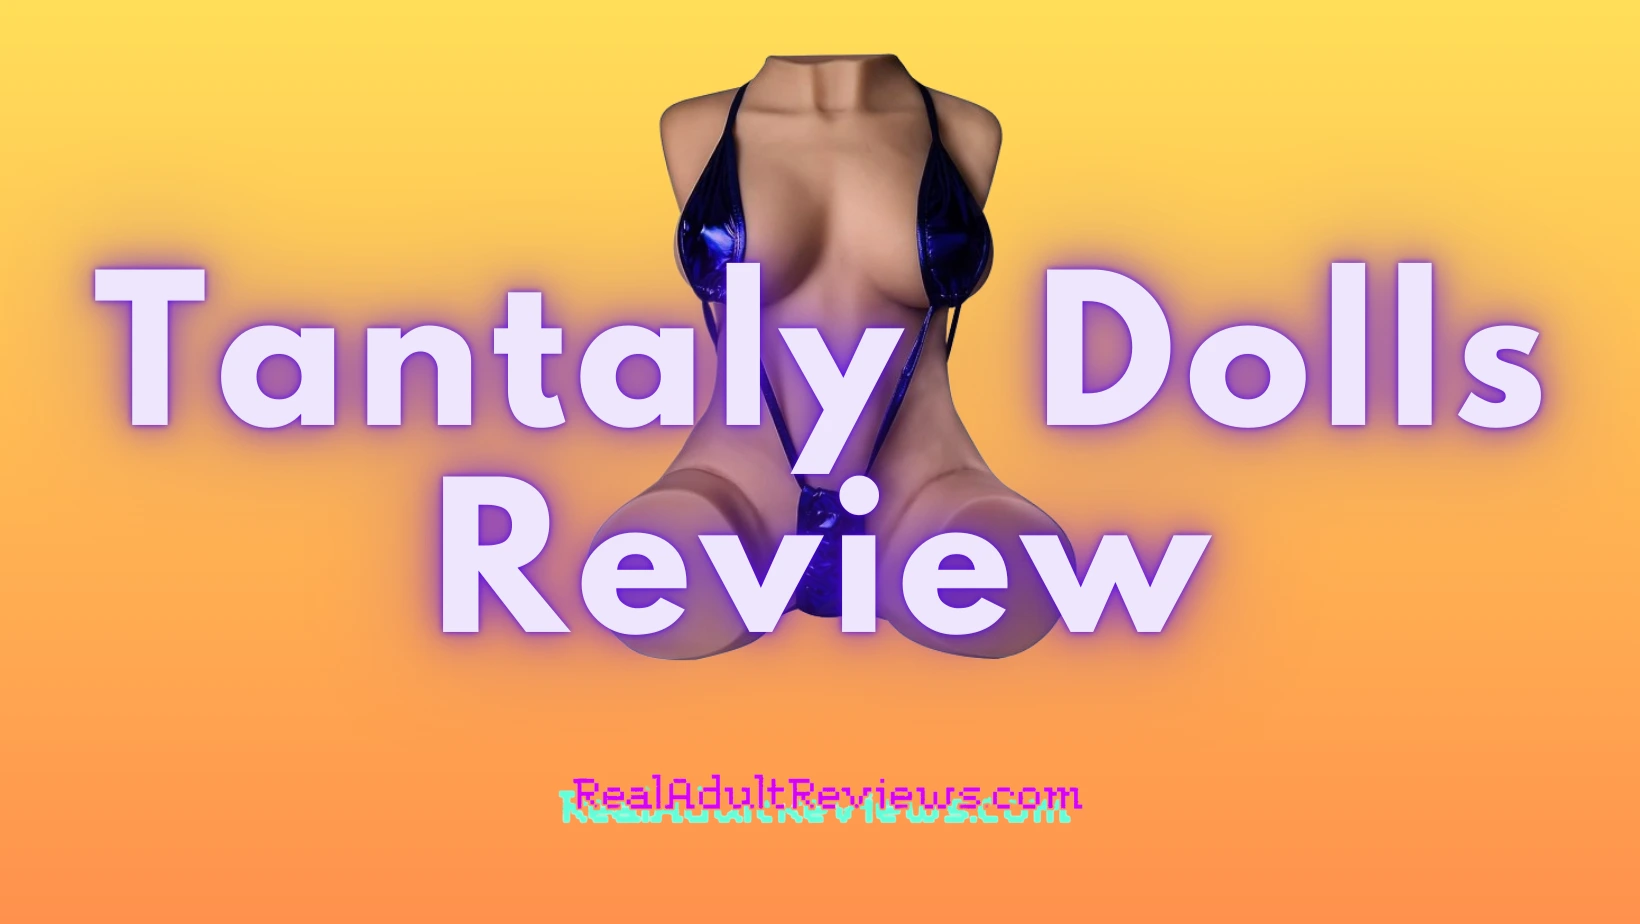 How to Choose Between Tantaly Realistic Sex Dolls? Honest Review